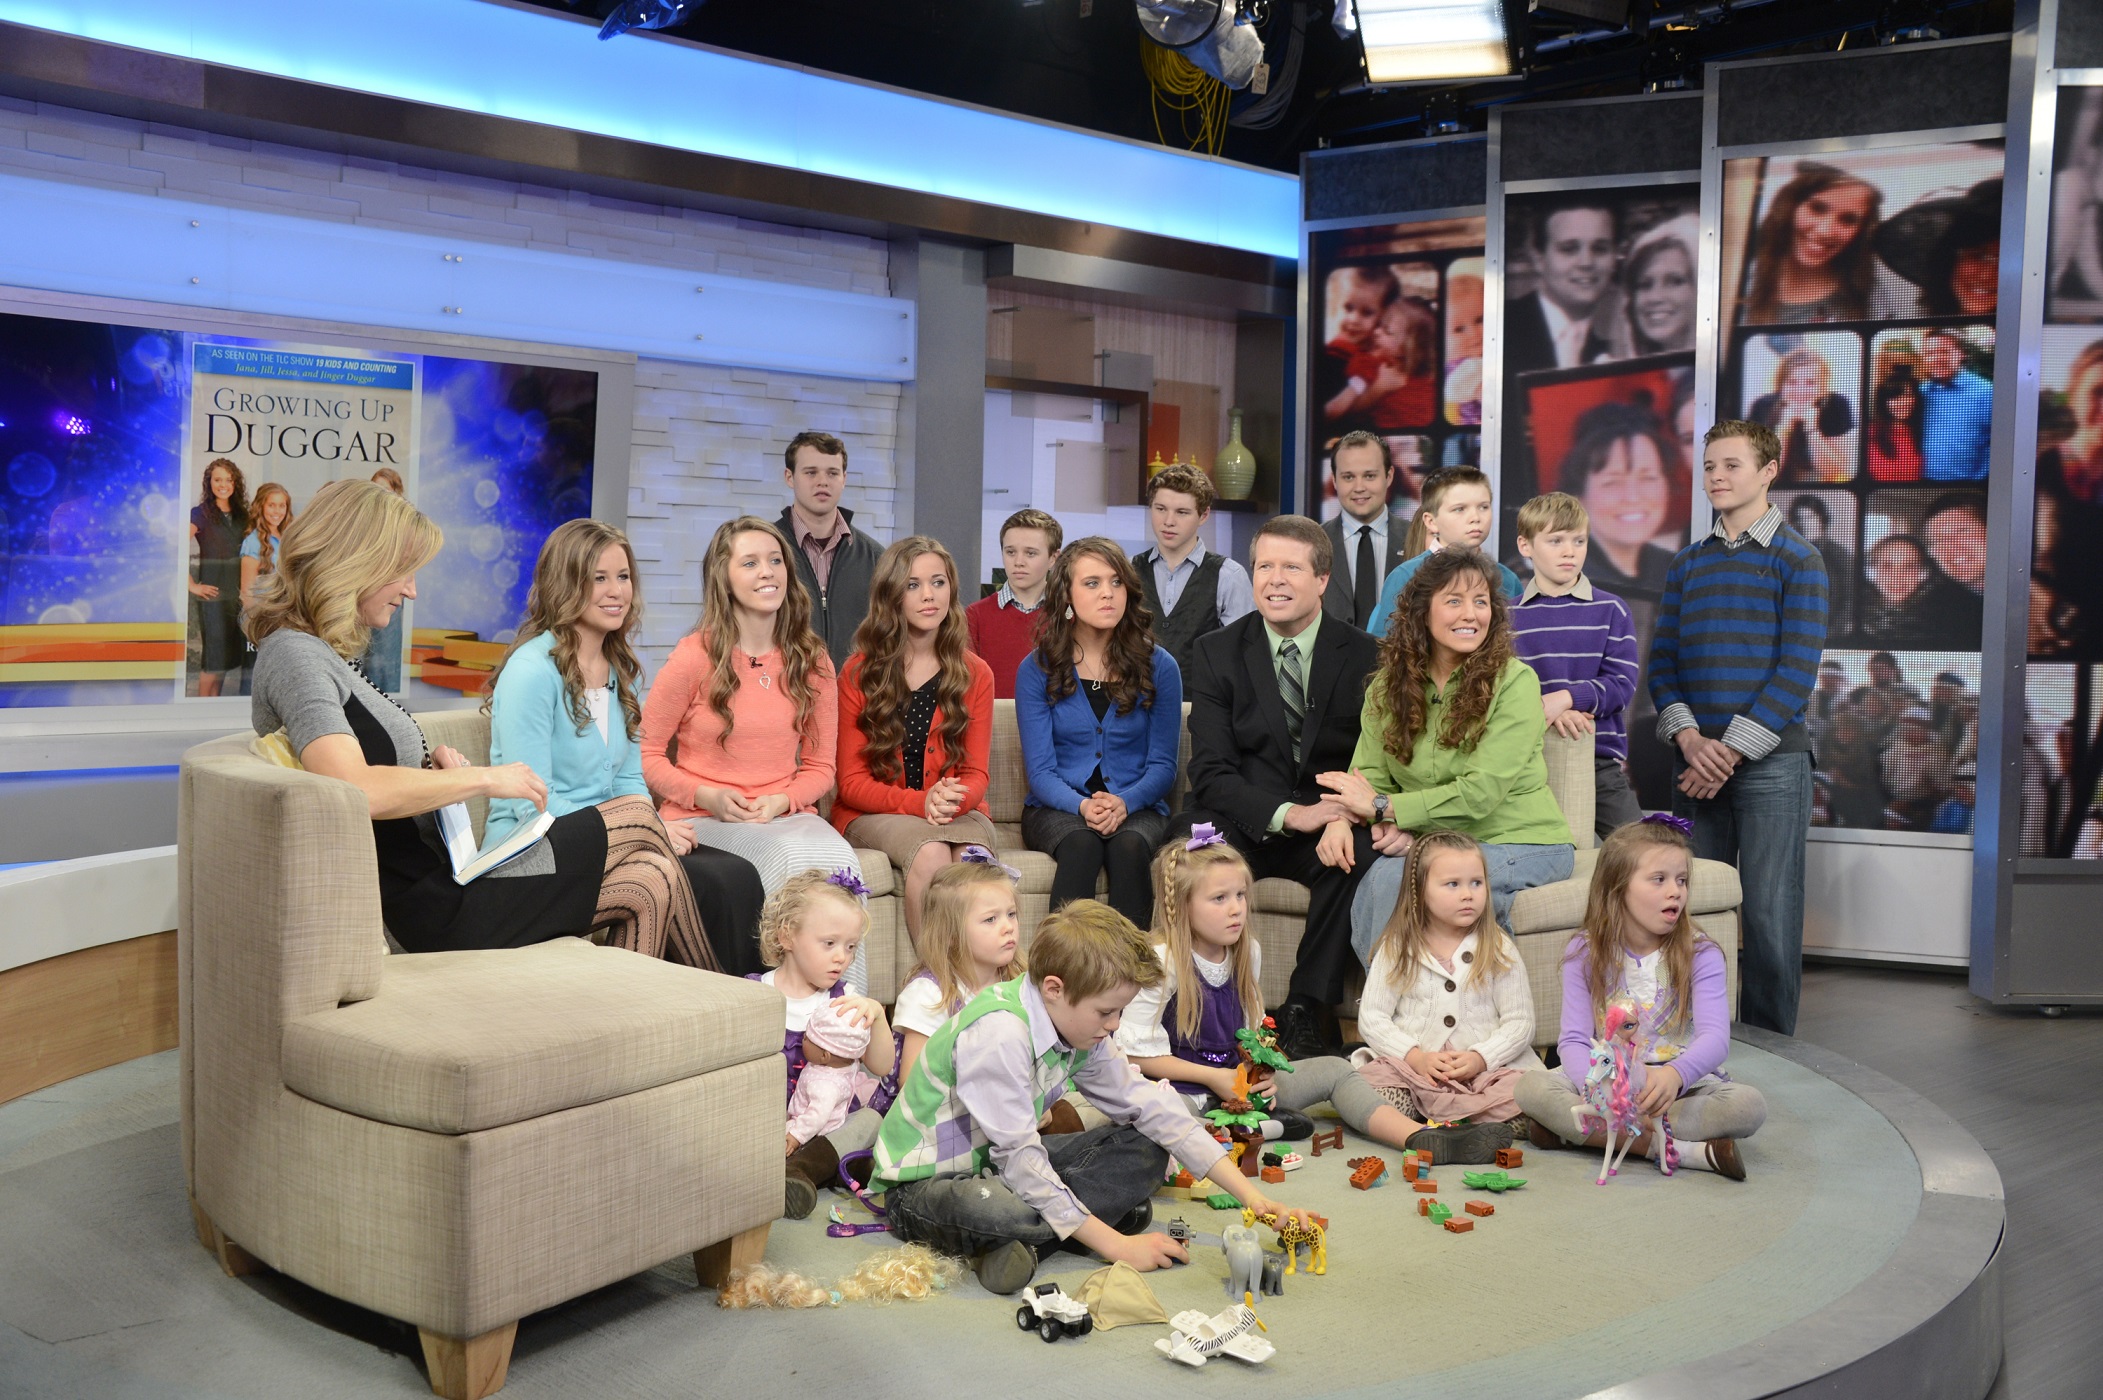 The Duggar family visits 'Good Morning America' in 2014 